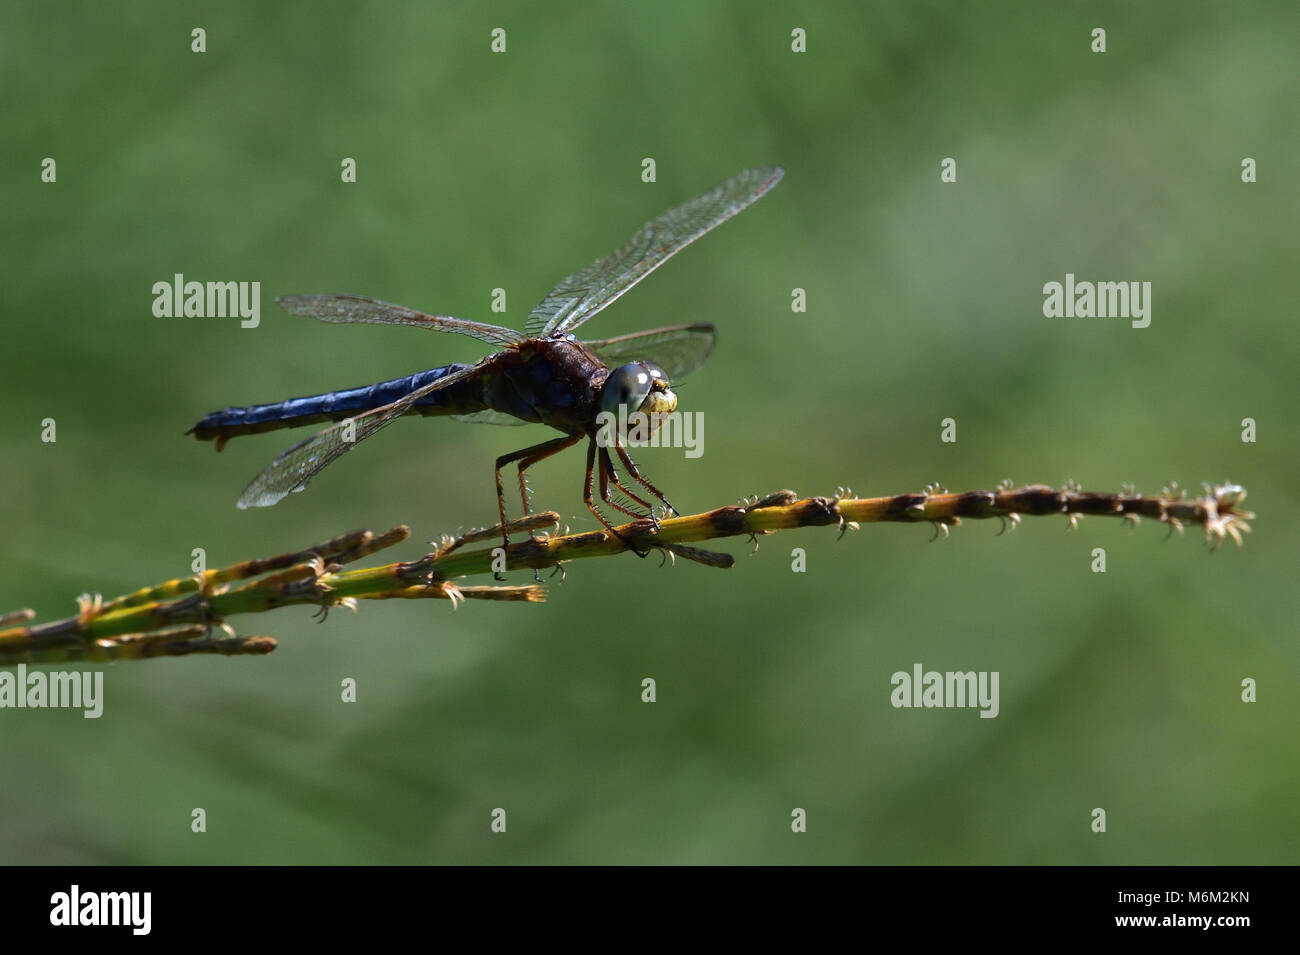 An Australian young Male Black-headed Skimmer Dragonfly resting on a Plant stem close-up Stock Photo